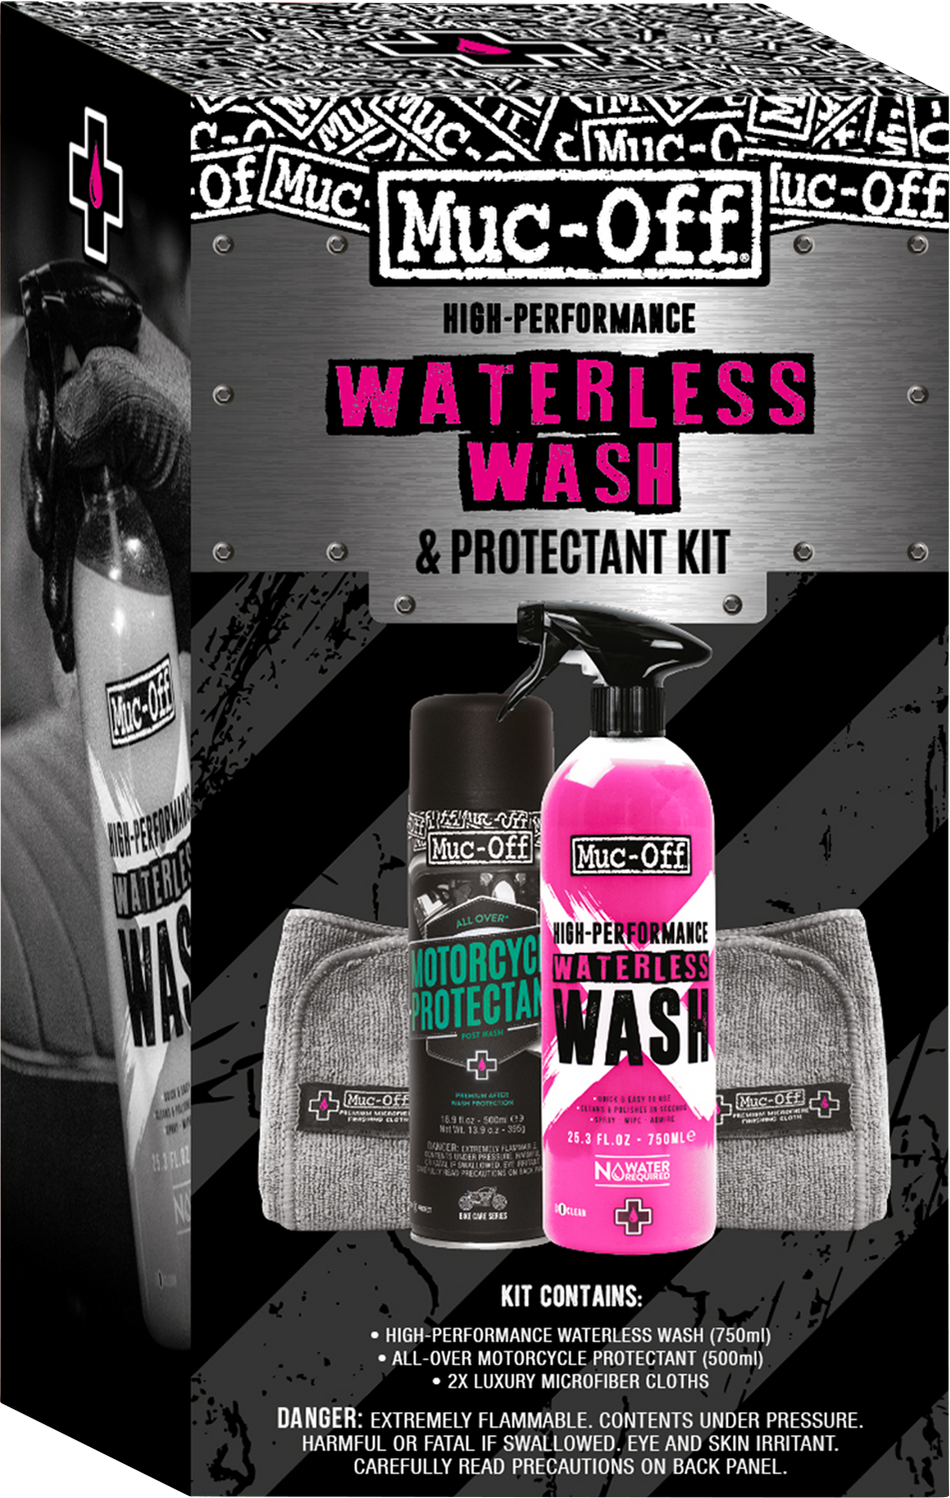 MUC-OFF USA Motorcycle Waterless Wash & Protectant Kit 20029US